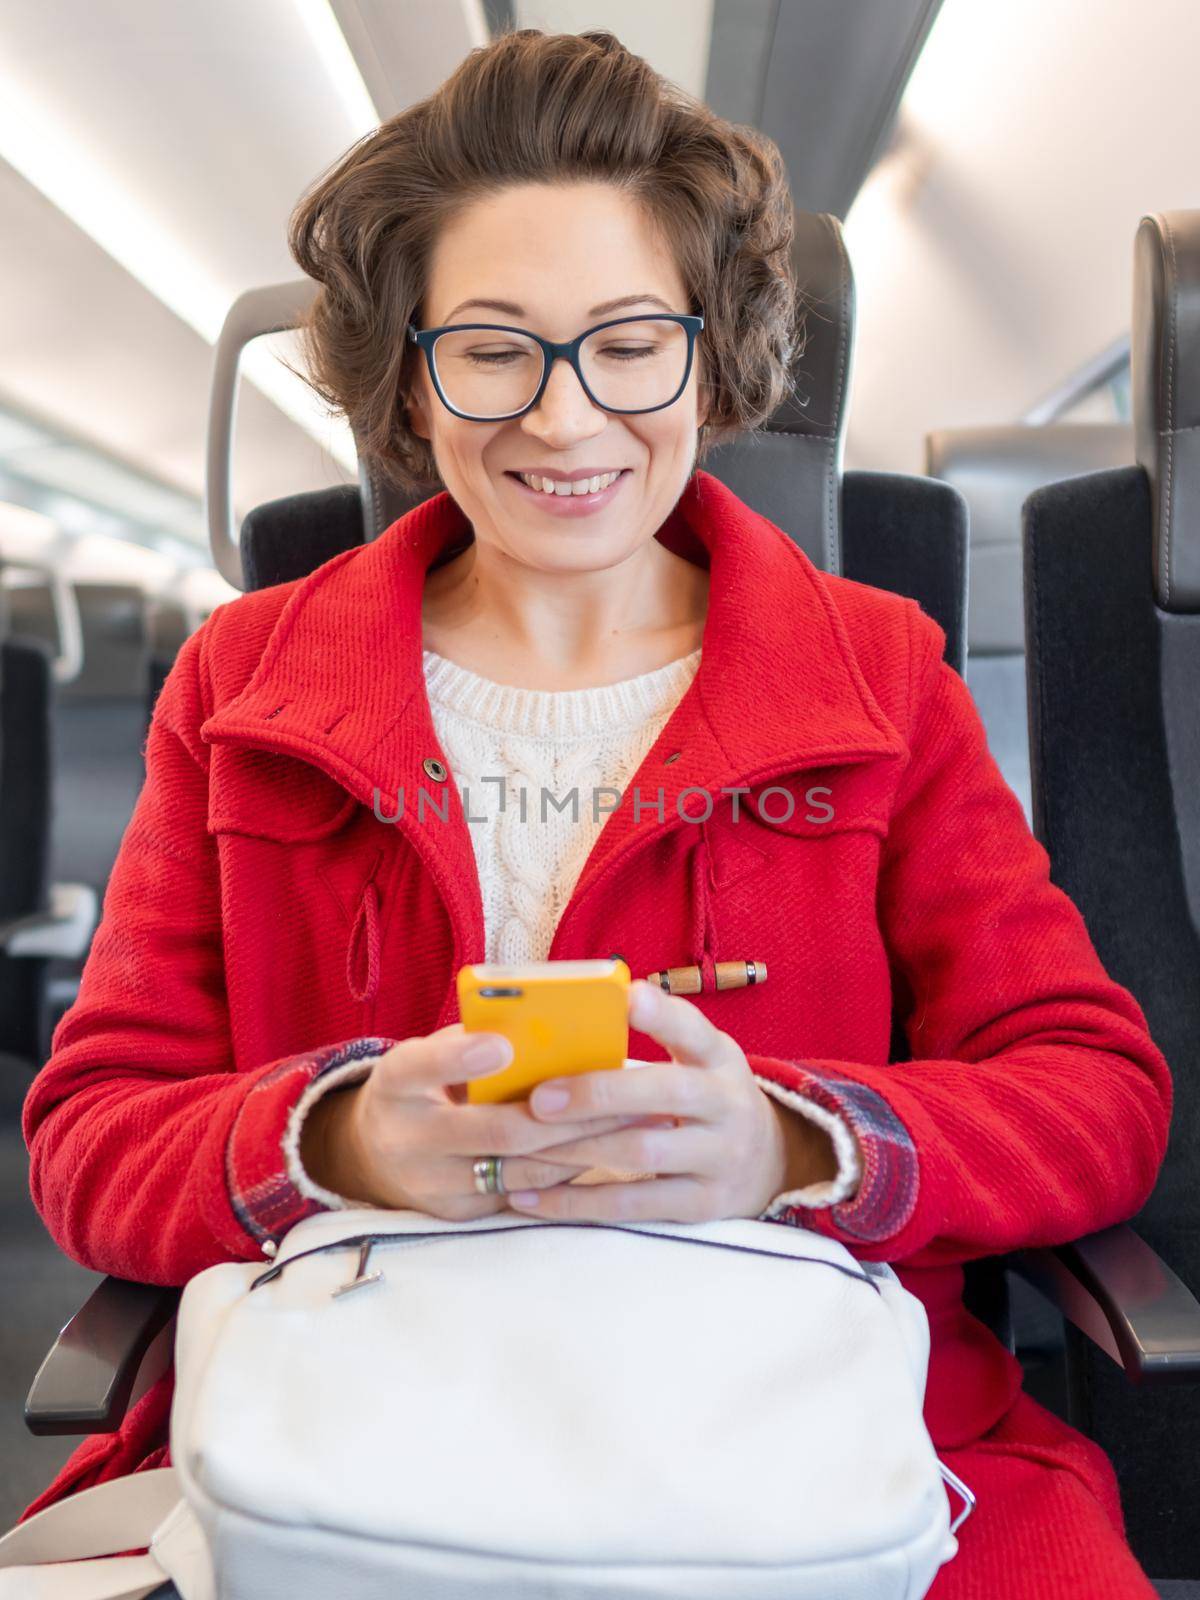 Smiling woman in red duffle coat texting on smartphone in suburban train. Travel by land vehicle.